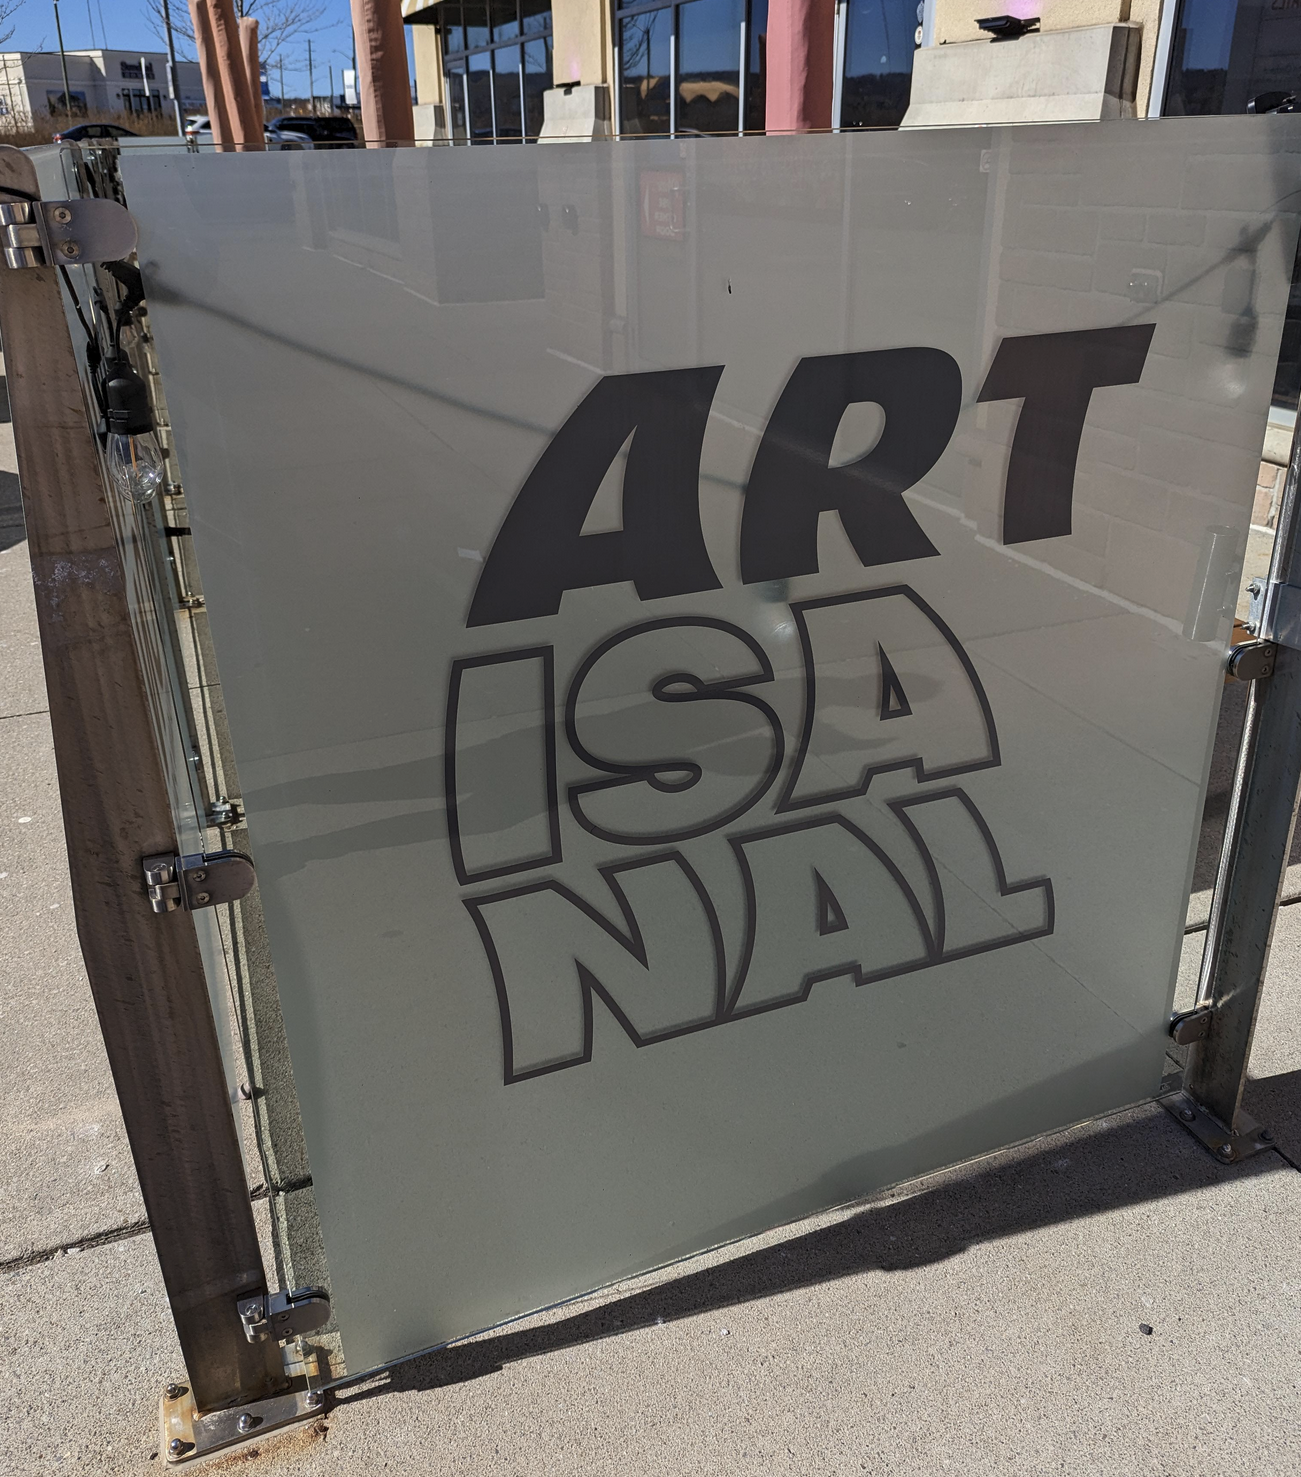 The word artisanal on an outdoor sign but one three lines:

ART
ISA
NAL

Some people will read this as "Art is Anal". Maybe you are one of them.